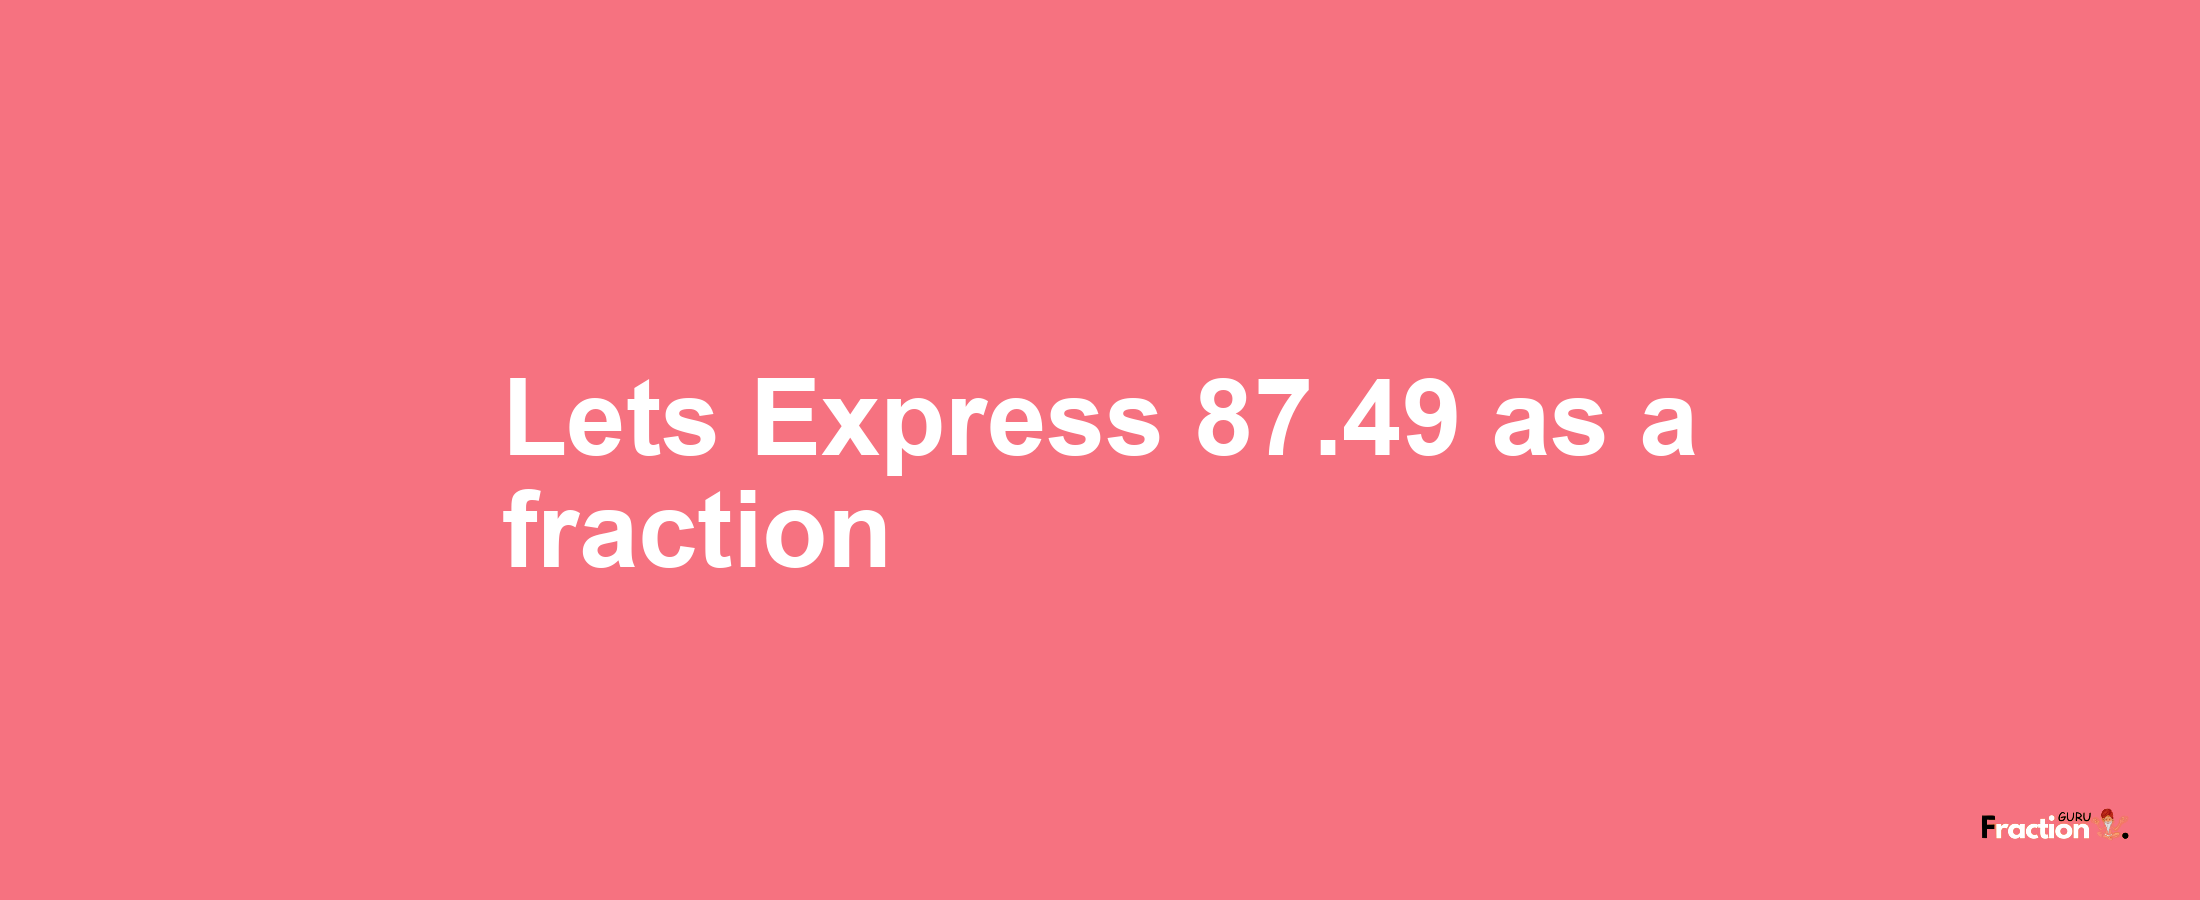 Lets Express 87.49 as afraction